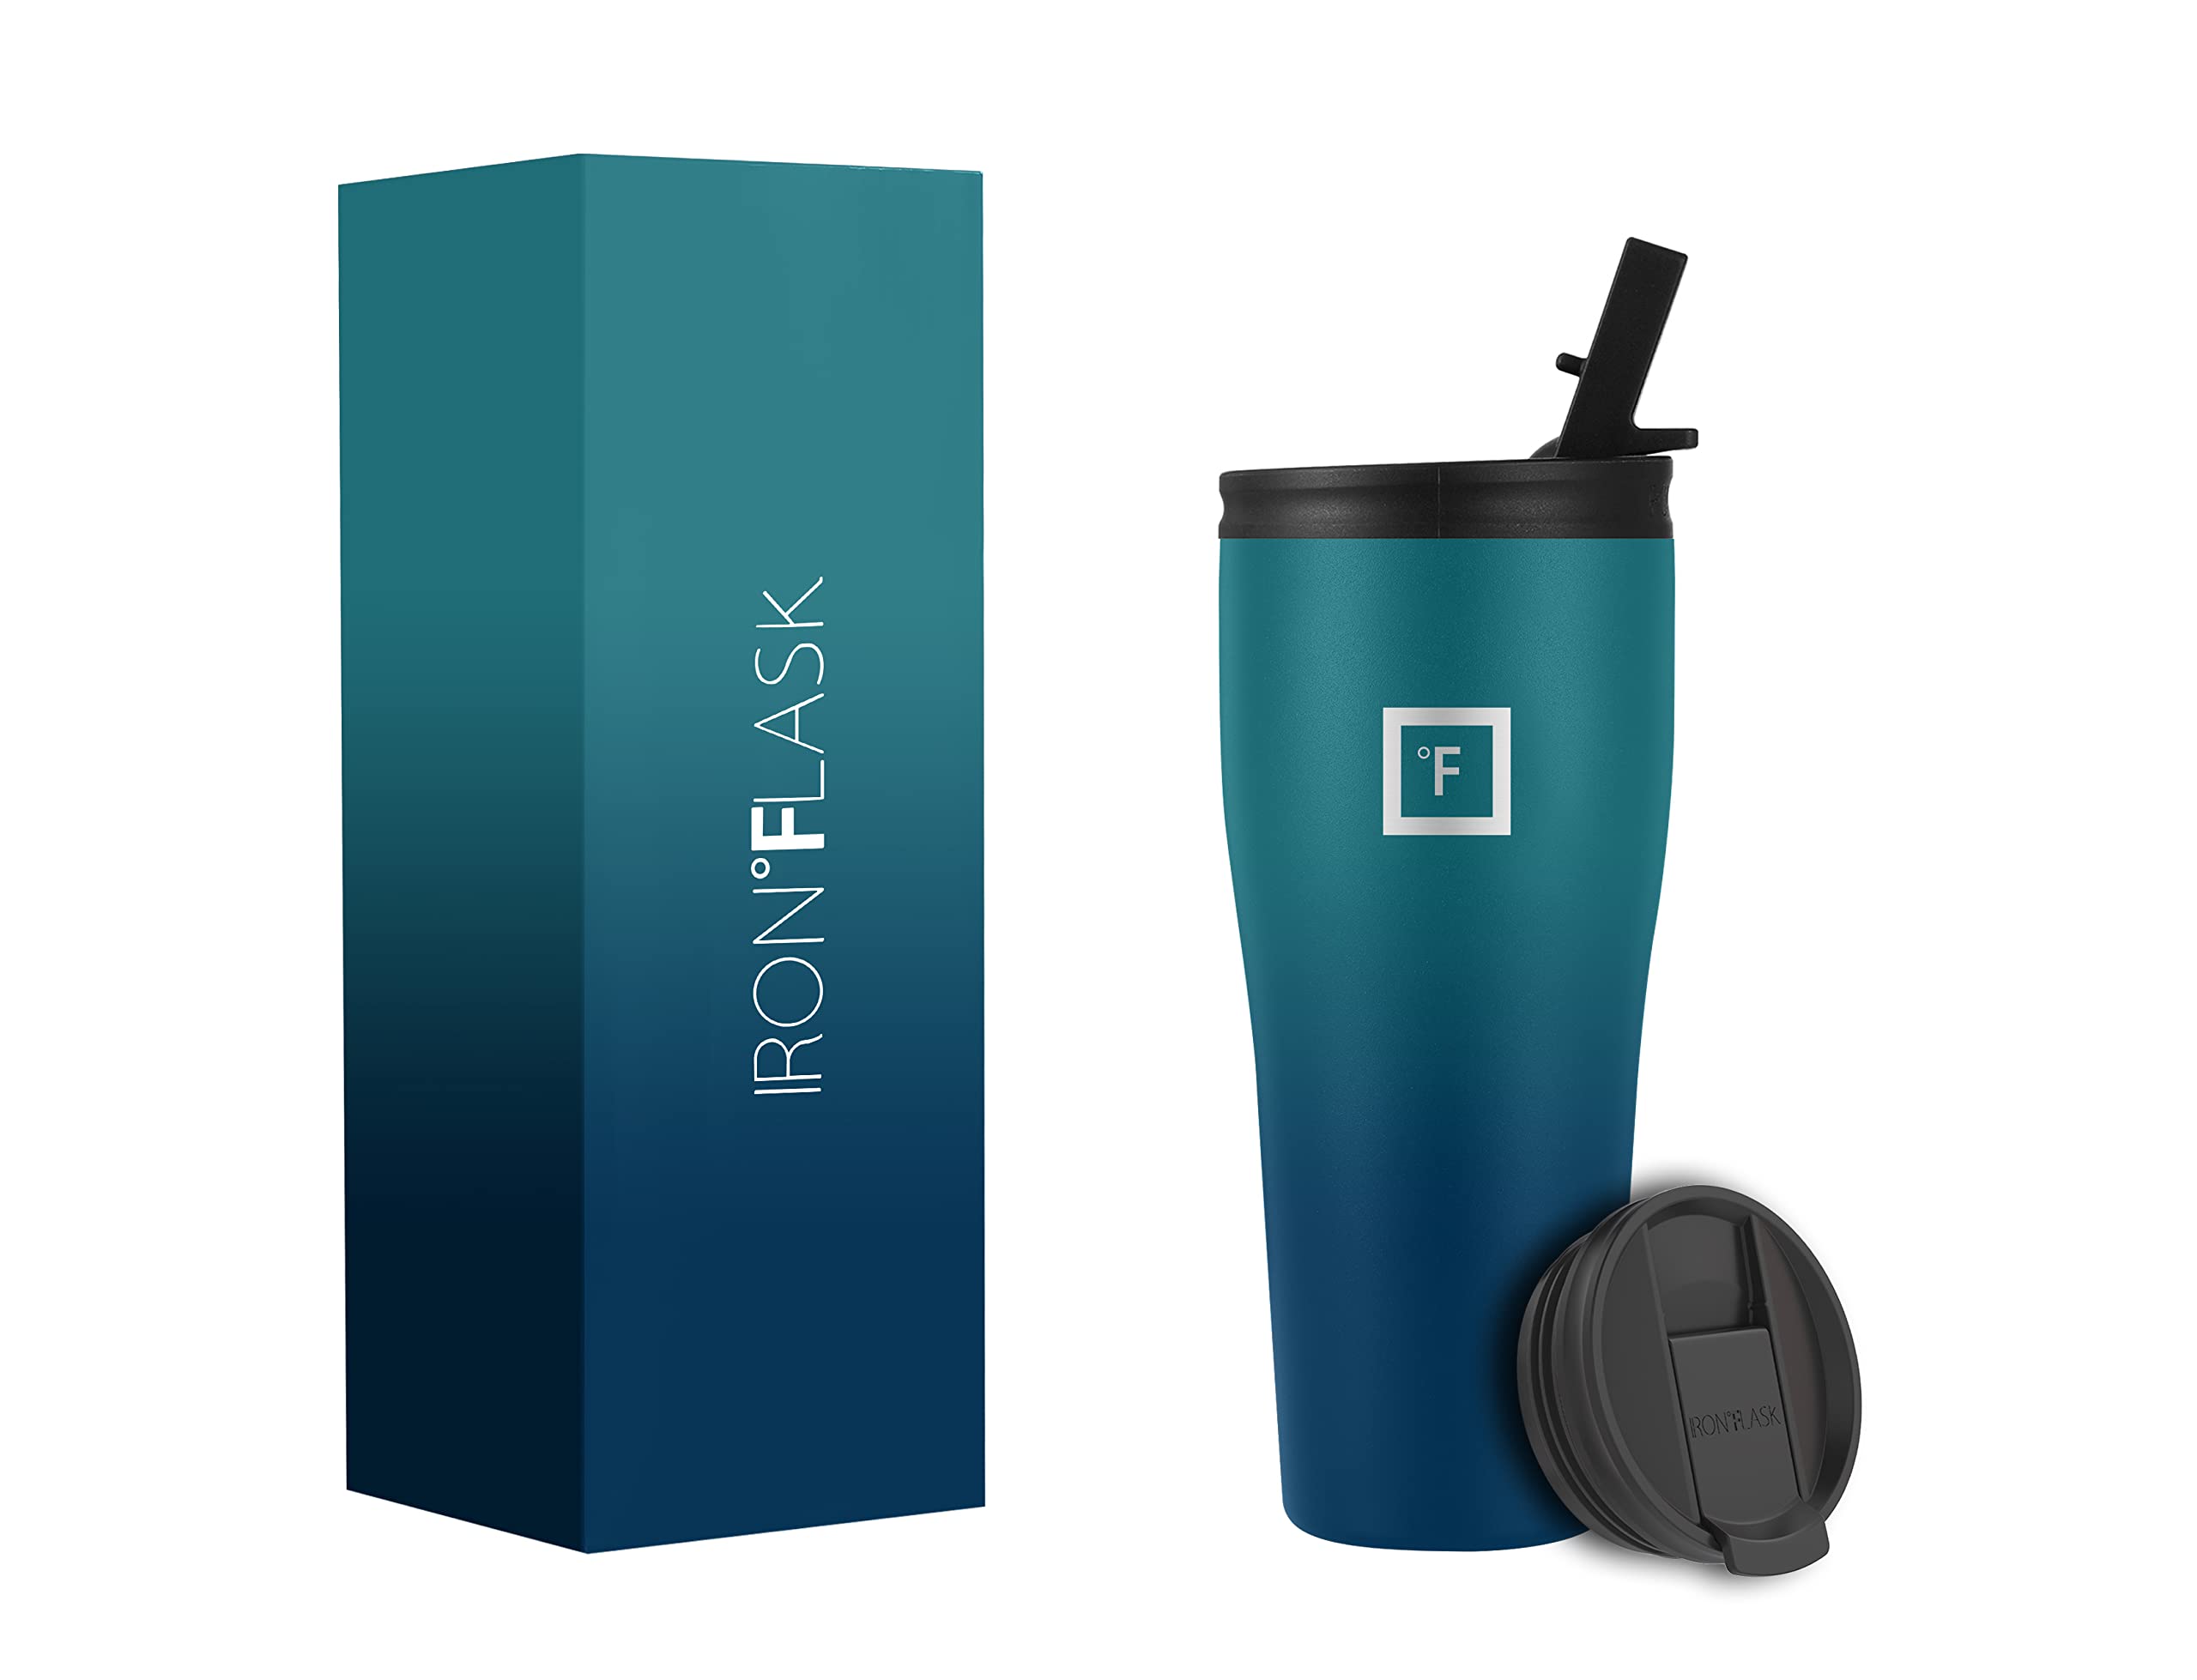 IRON °FLASK Rover Tumbler 2.0-20 Oz 2 Lids Vacuum Insulated Stainless Steel Bottle, Double Walled, Drinking Cup - Thermos Travel Mug - Mothers Day Gift - Dark Night